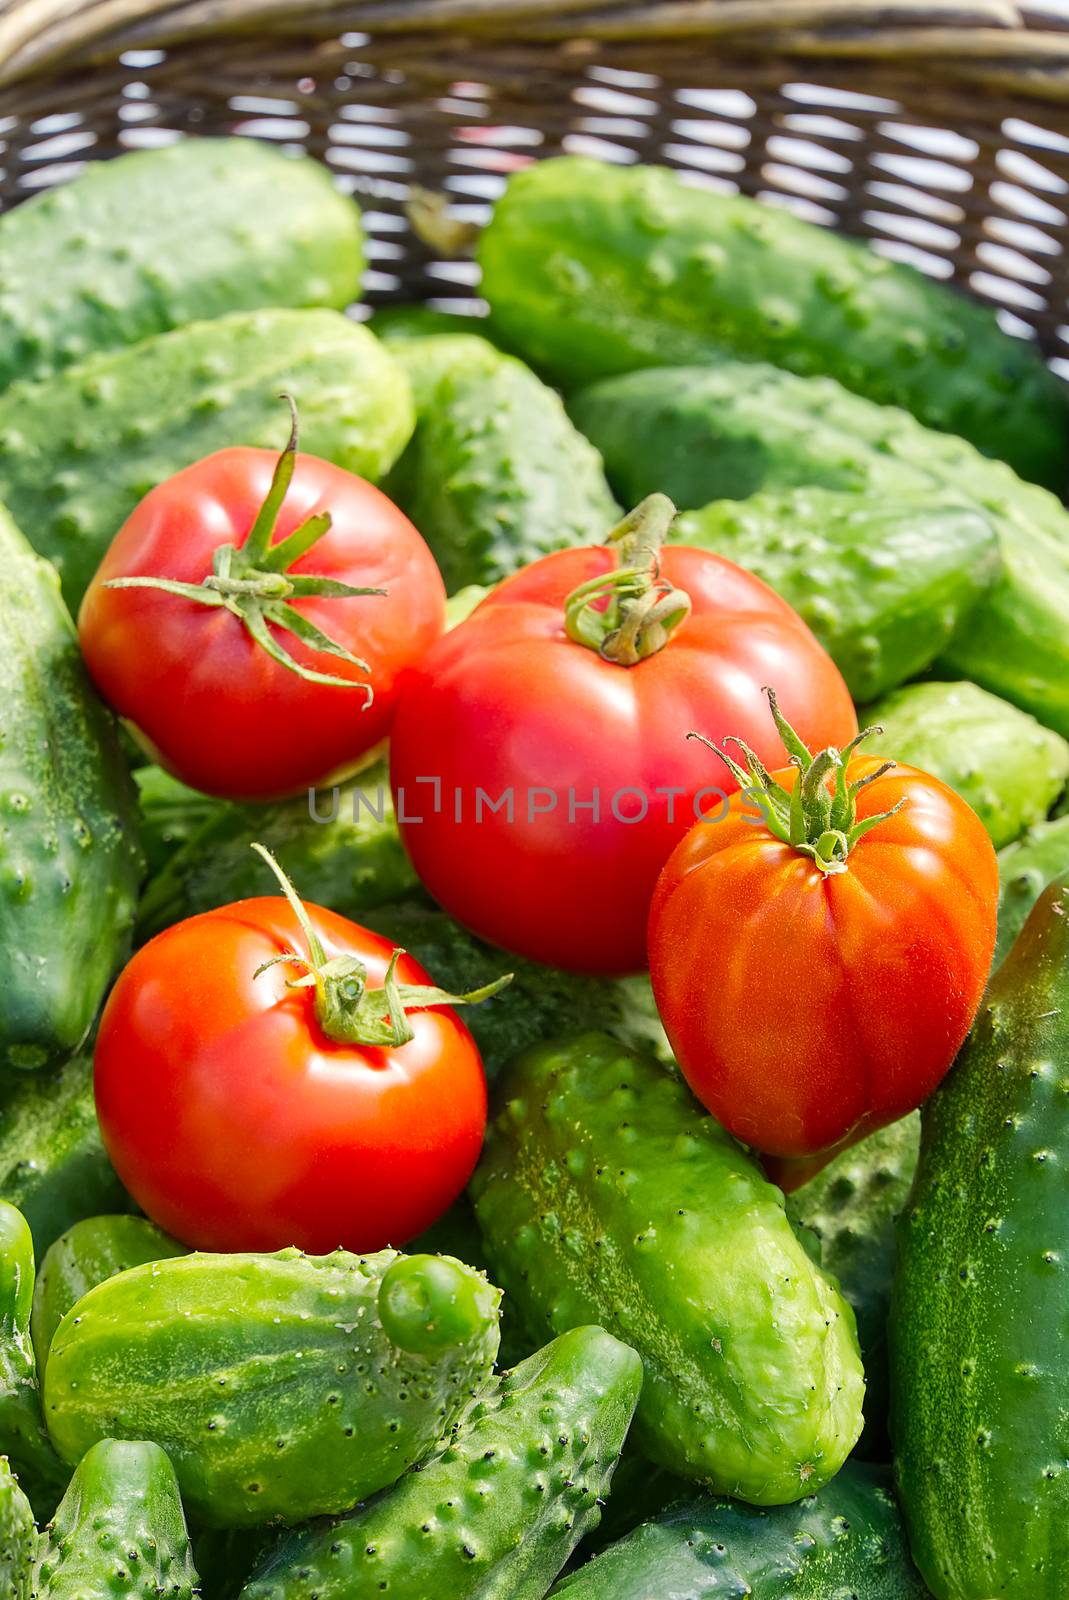 cucumbers and tomatoes in a wicker basket close-up. village eco food home gardening concept. by PhotoTime